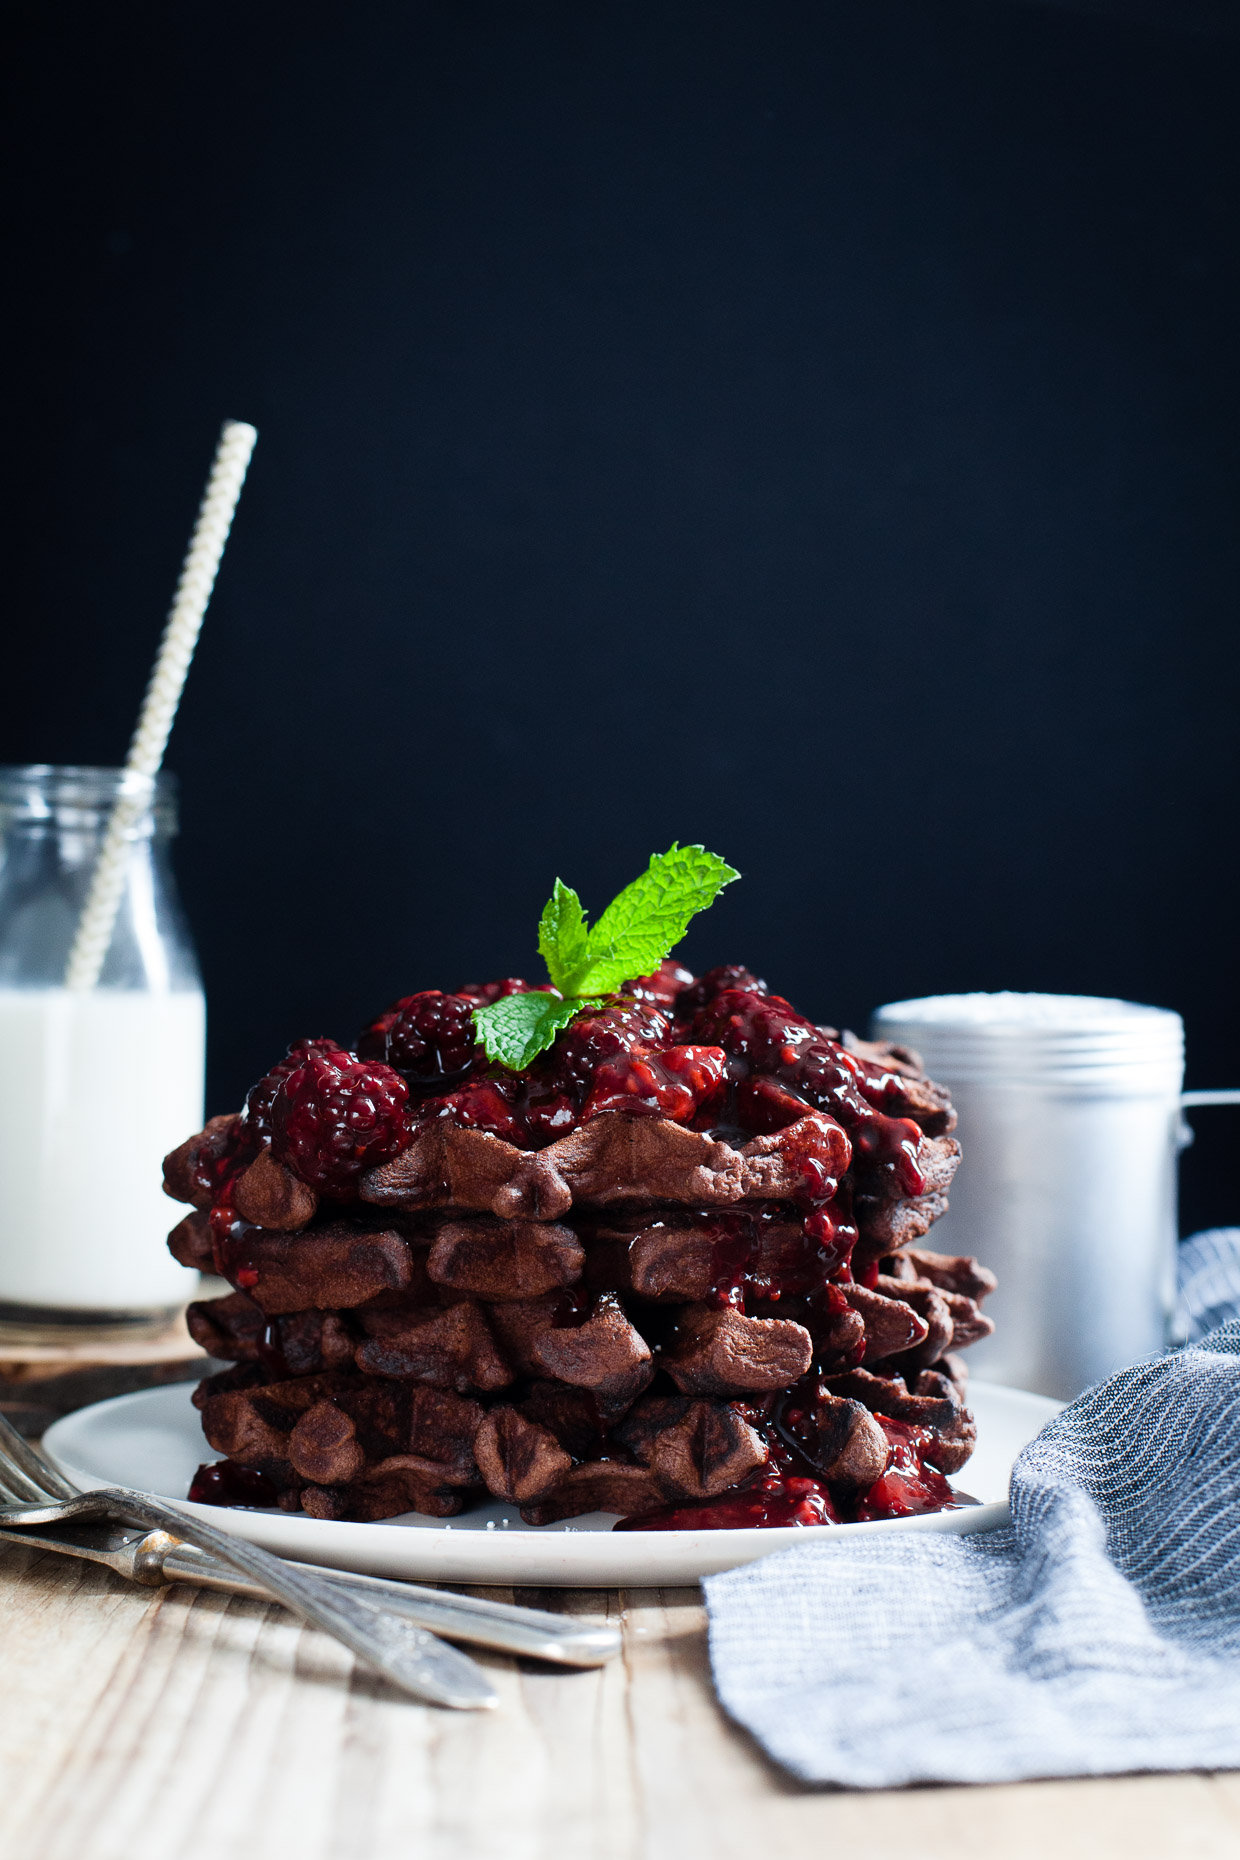 Gluten-Free Chocolate Chestnut Waffles with Balsamic Roasted Berries